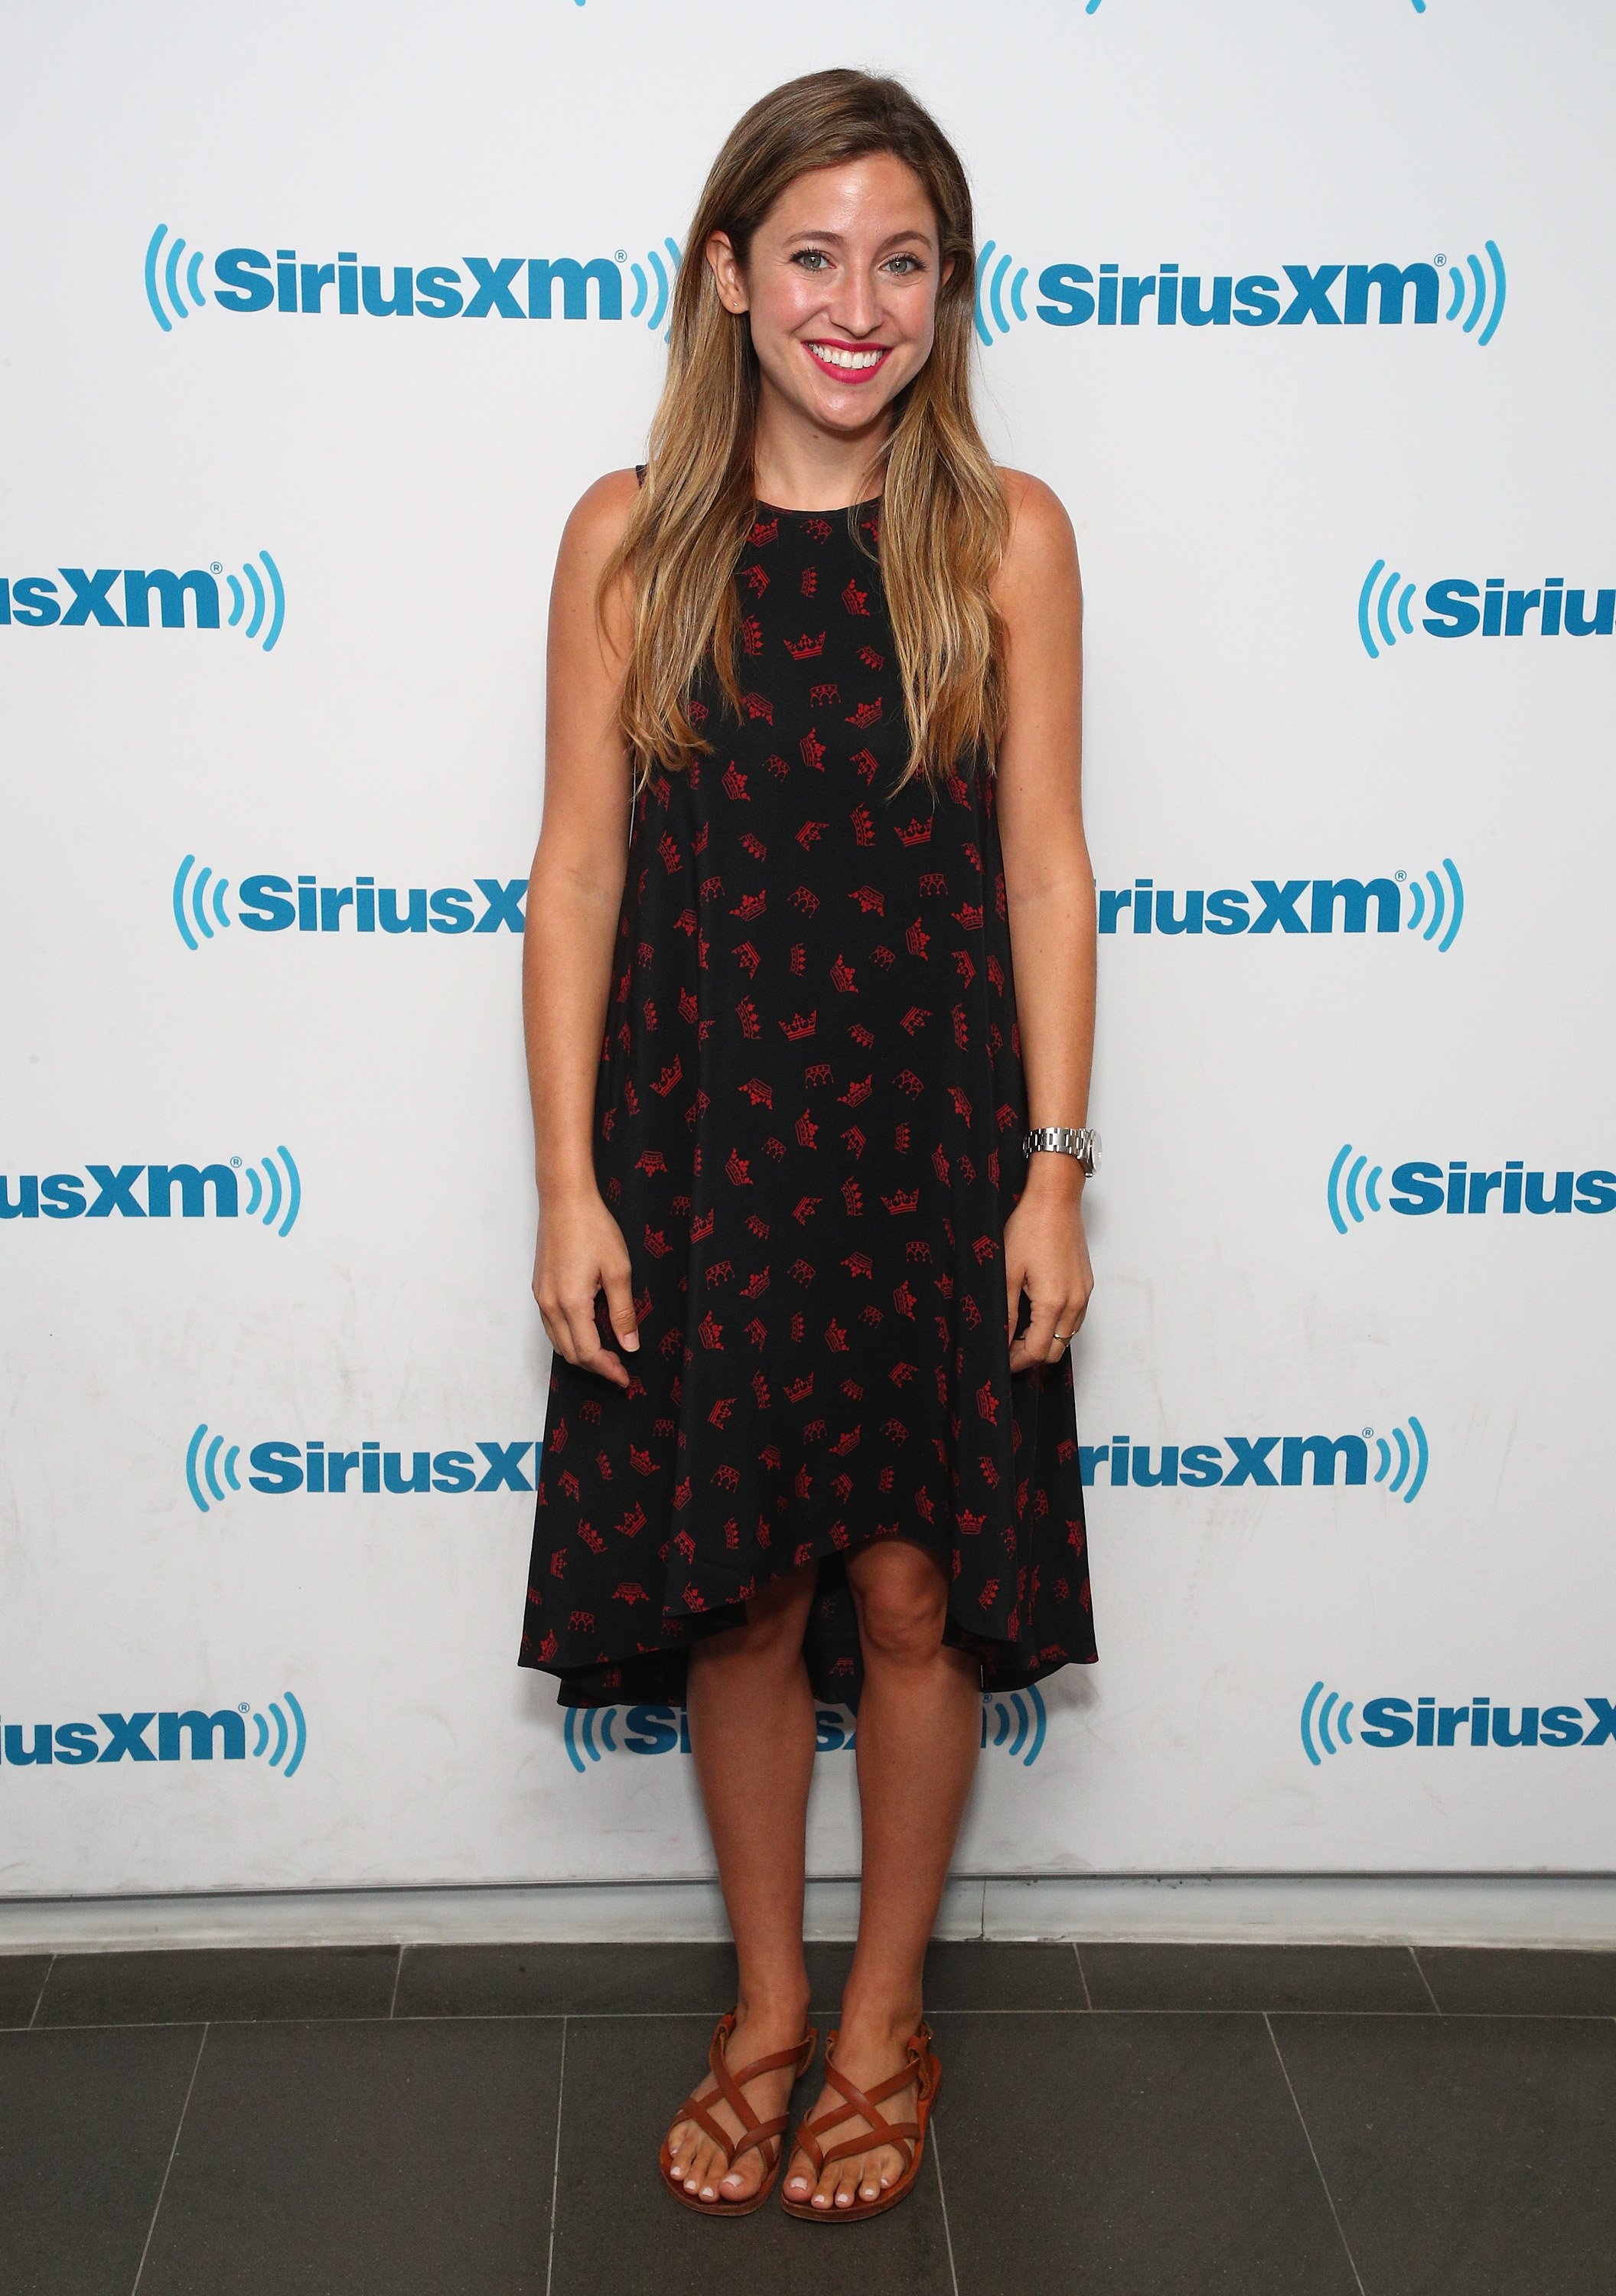 Rachel DeLoache Williams photographed during her visit at the SiriusXM Studios on in New York City | Source: Getty Images